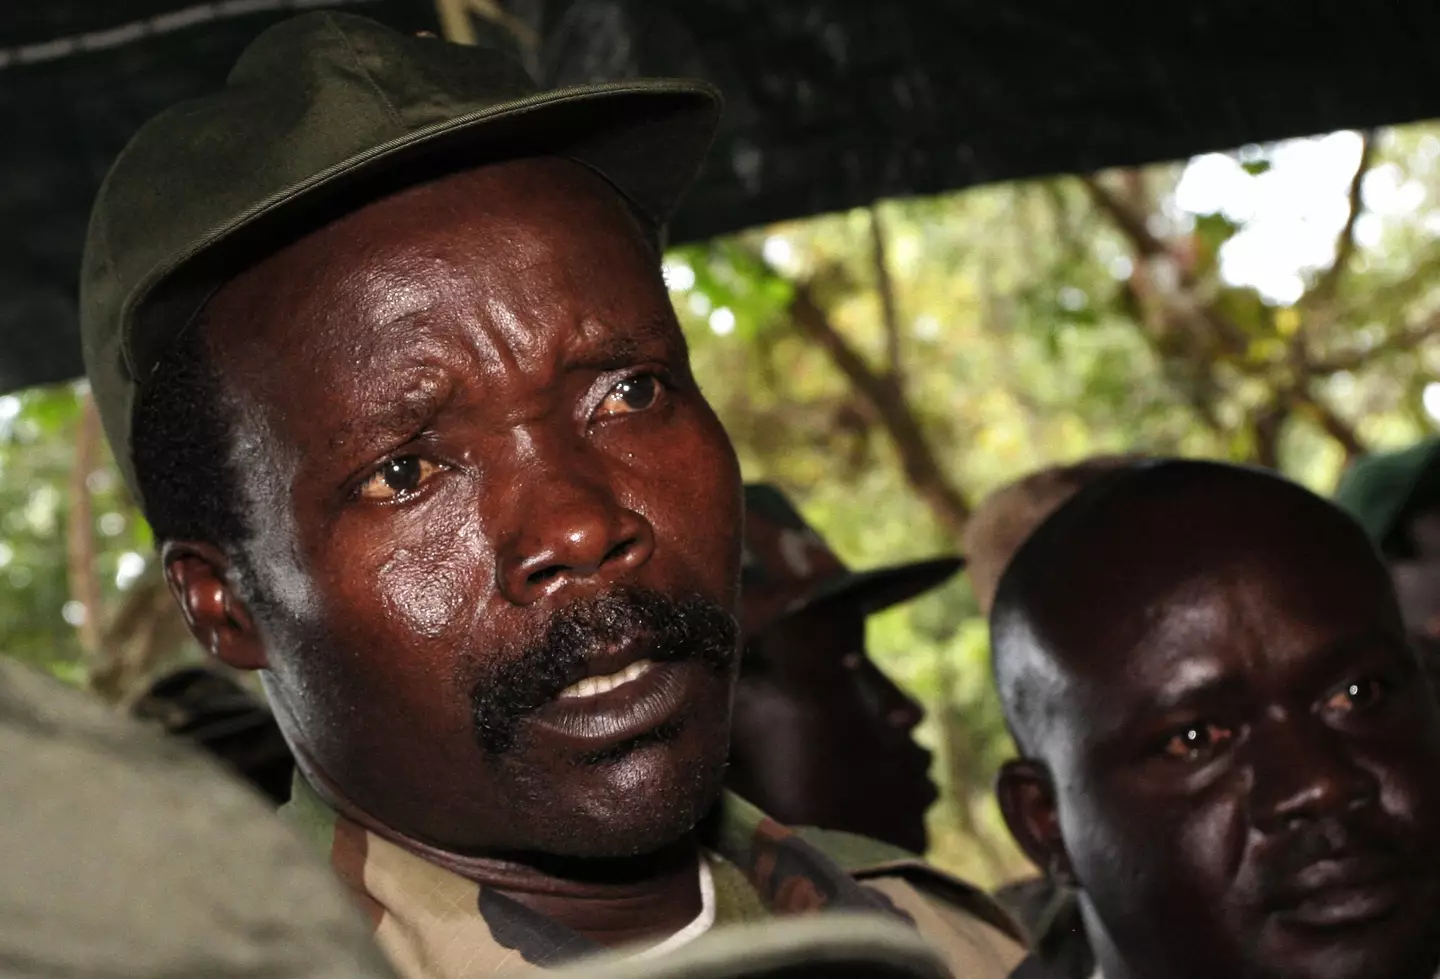 The Ugandan warlord who was made famous in a viral video in 2012 is reportedly close to being caught by a Russian mercenary group. (Adam Pletts/Getty Images)